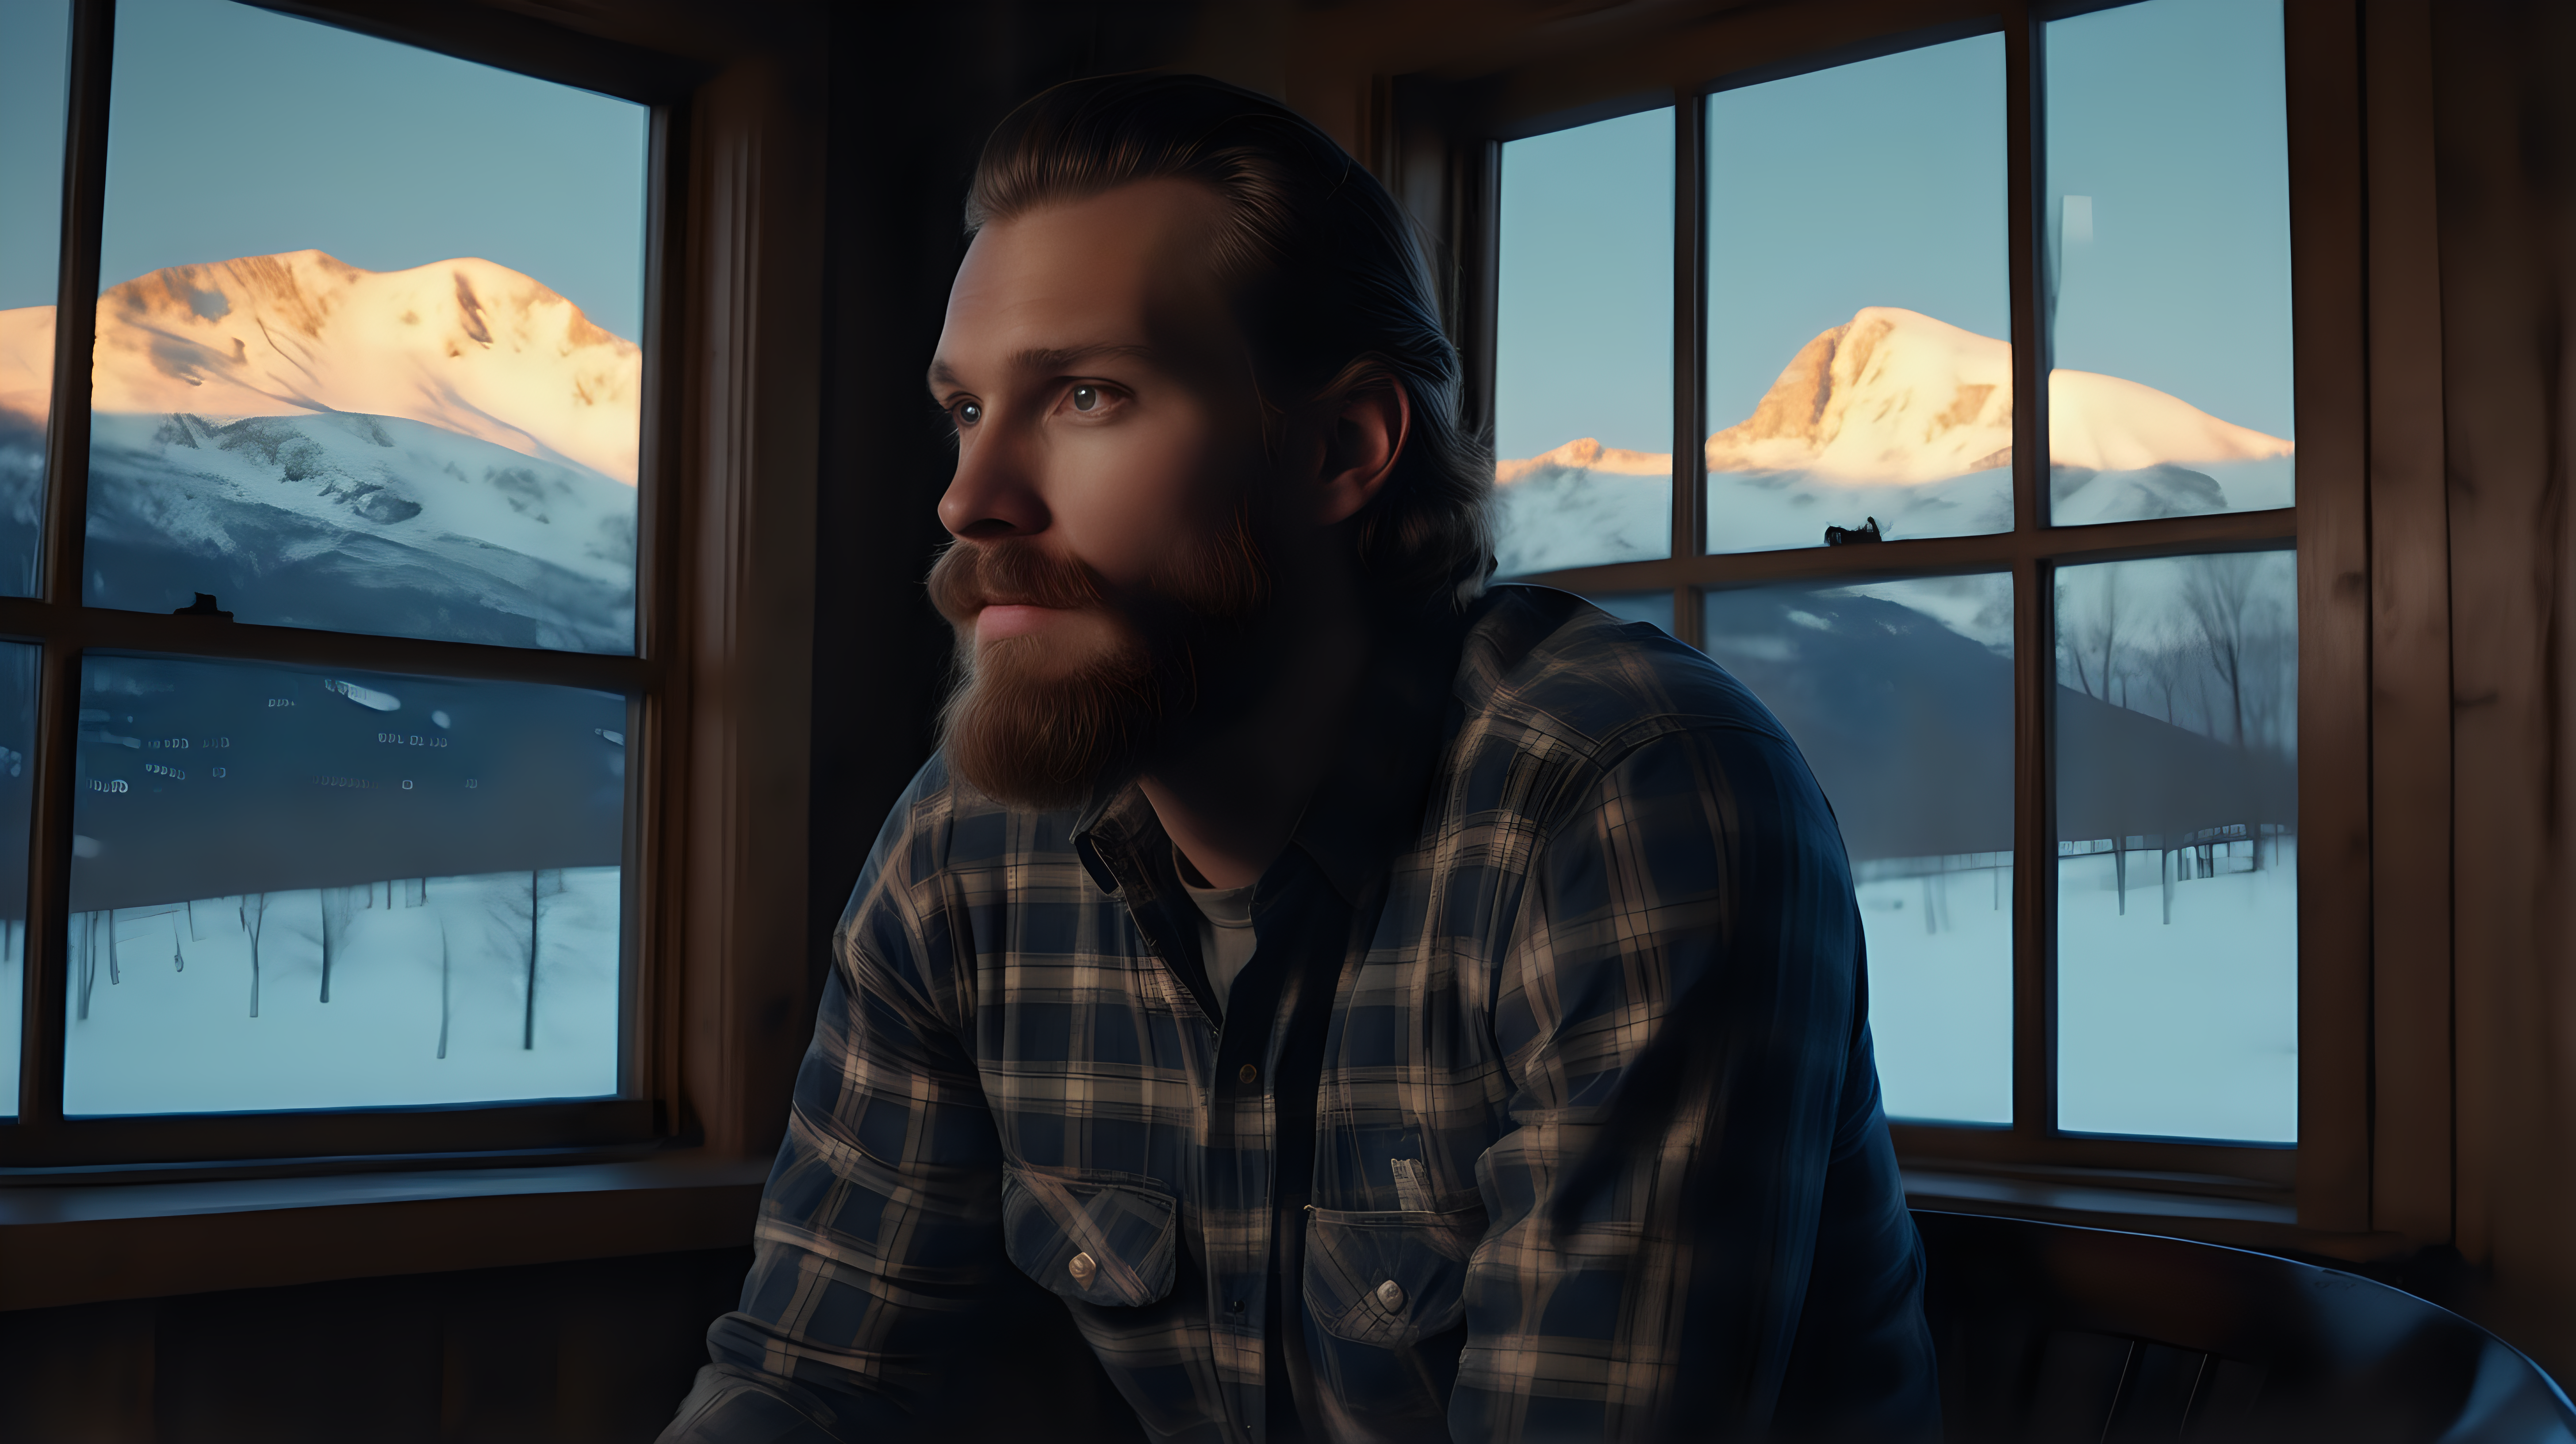 The photo is taken in a mountain house. a handsome man is sit on a chair near the window (we can see the snow mountains at a distance) and a chimney, he's got his back to the camera. he is wearing a plaid shirt and jeans. he has long brown hair and a beard. he is looking back at the viewer with a sugestive look (almost inviting us to be there). outside it is night and snowy. The lighting in the portrait should be dramatic. Sharp focus. A perfect example of cinematic shot. Use muted colors to add to the scene. 